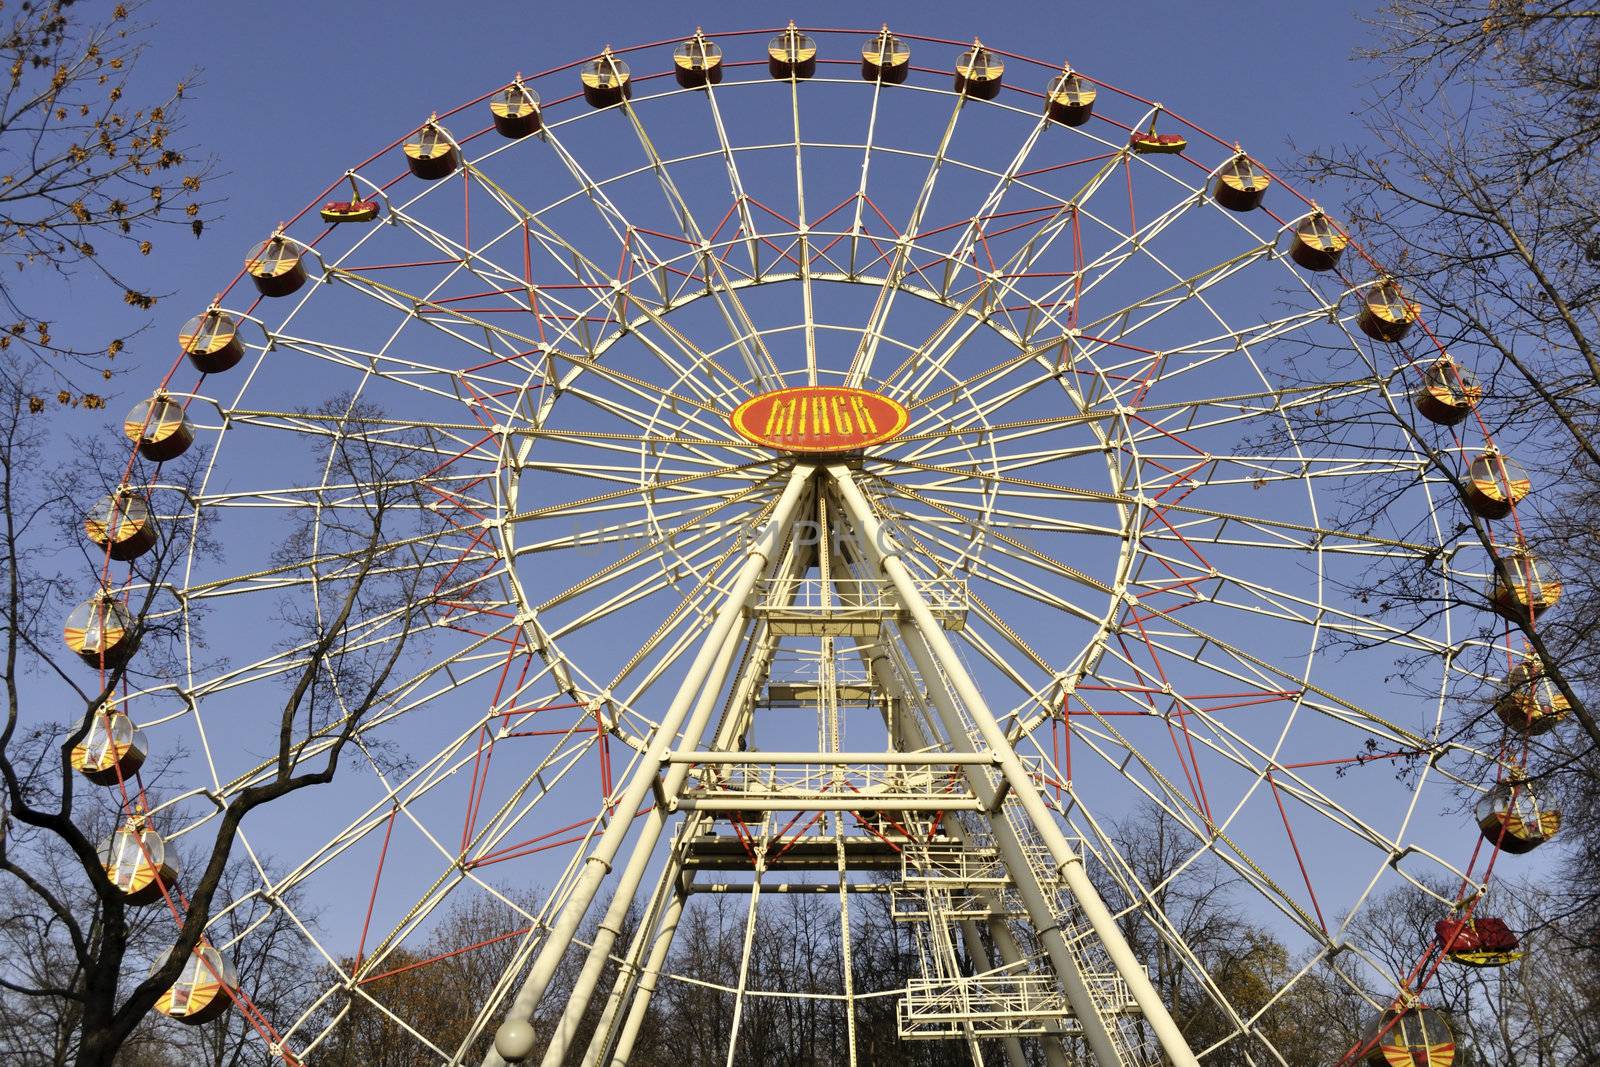 Minsk ferris wheel with name 'Minsk' located in central part of Belarus Capital inside famous Gorky Park